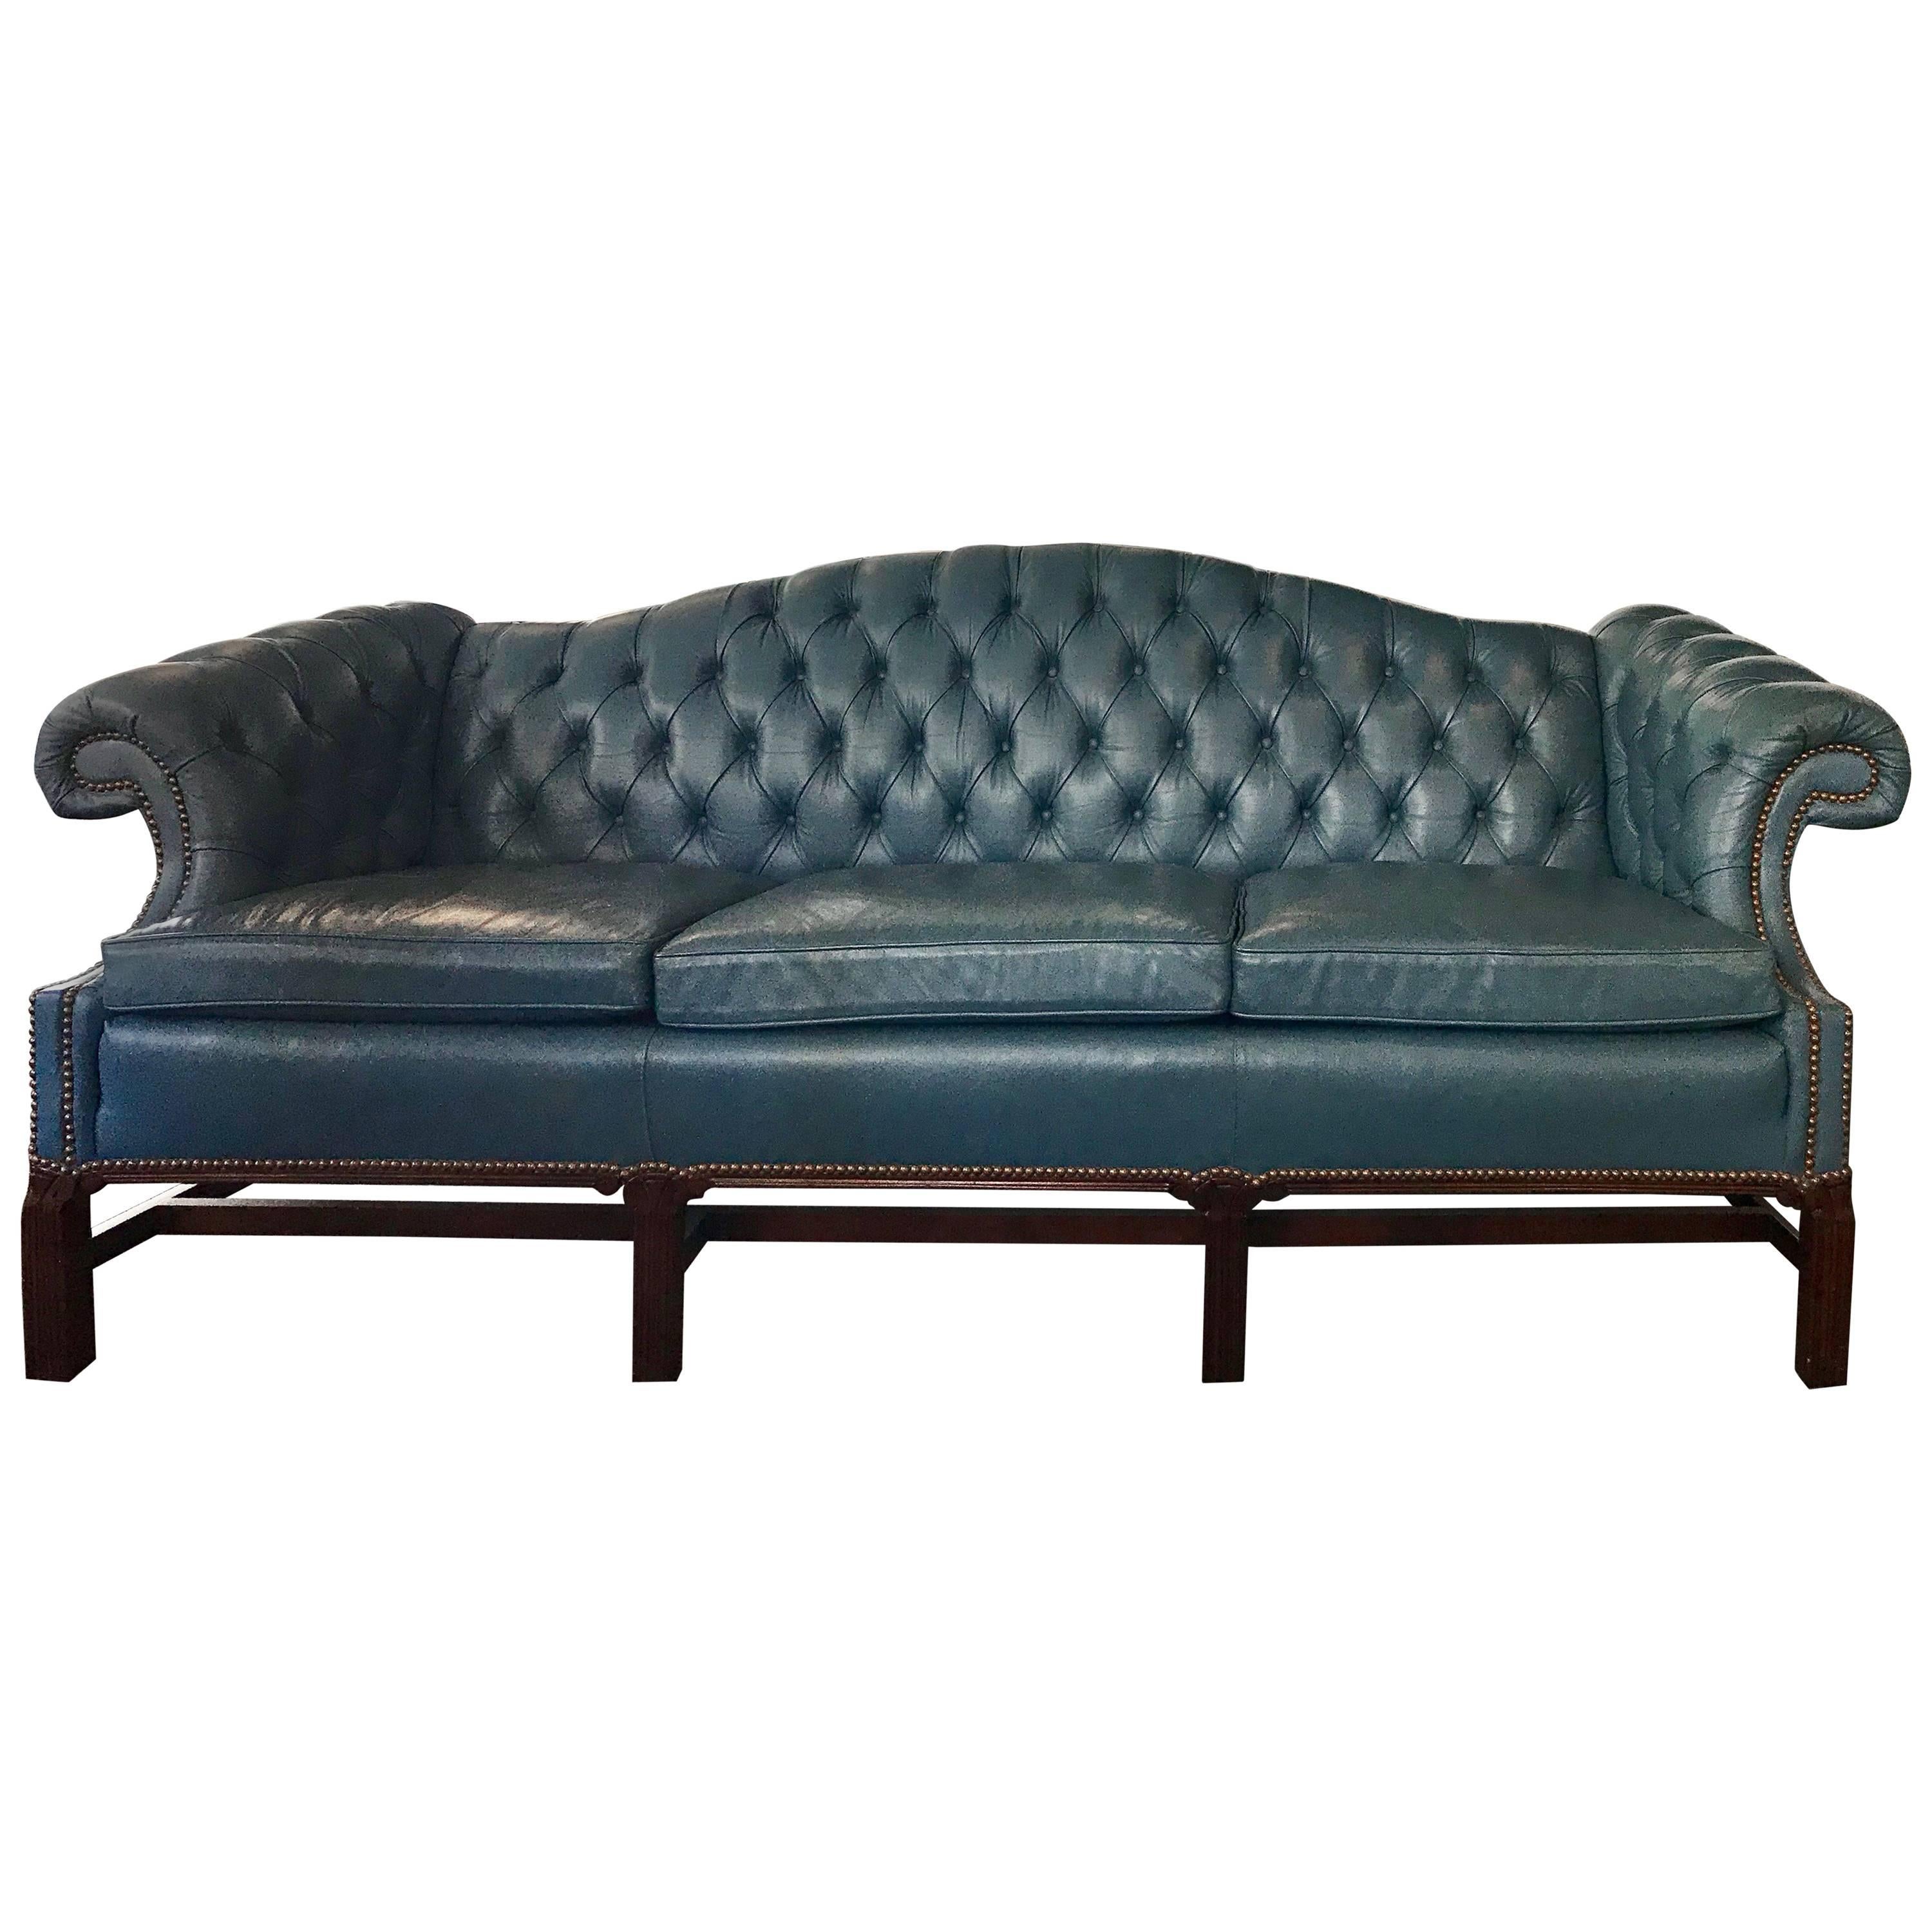 French Blue Leather Chesterfield Library Sofa